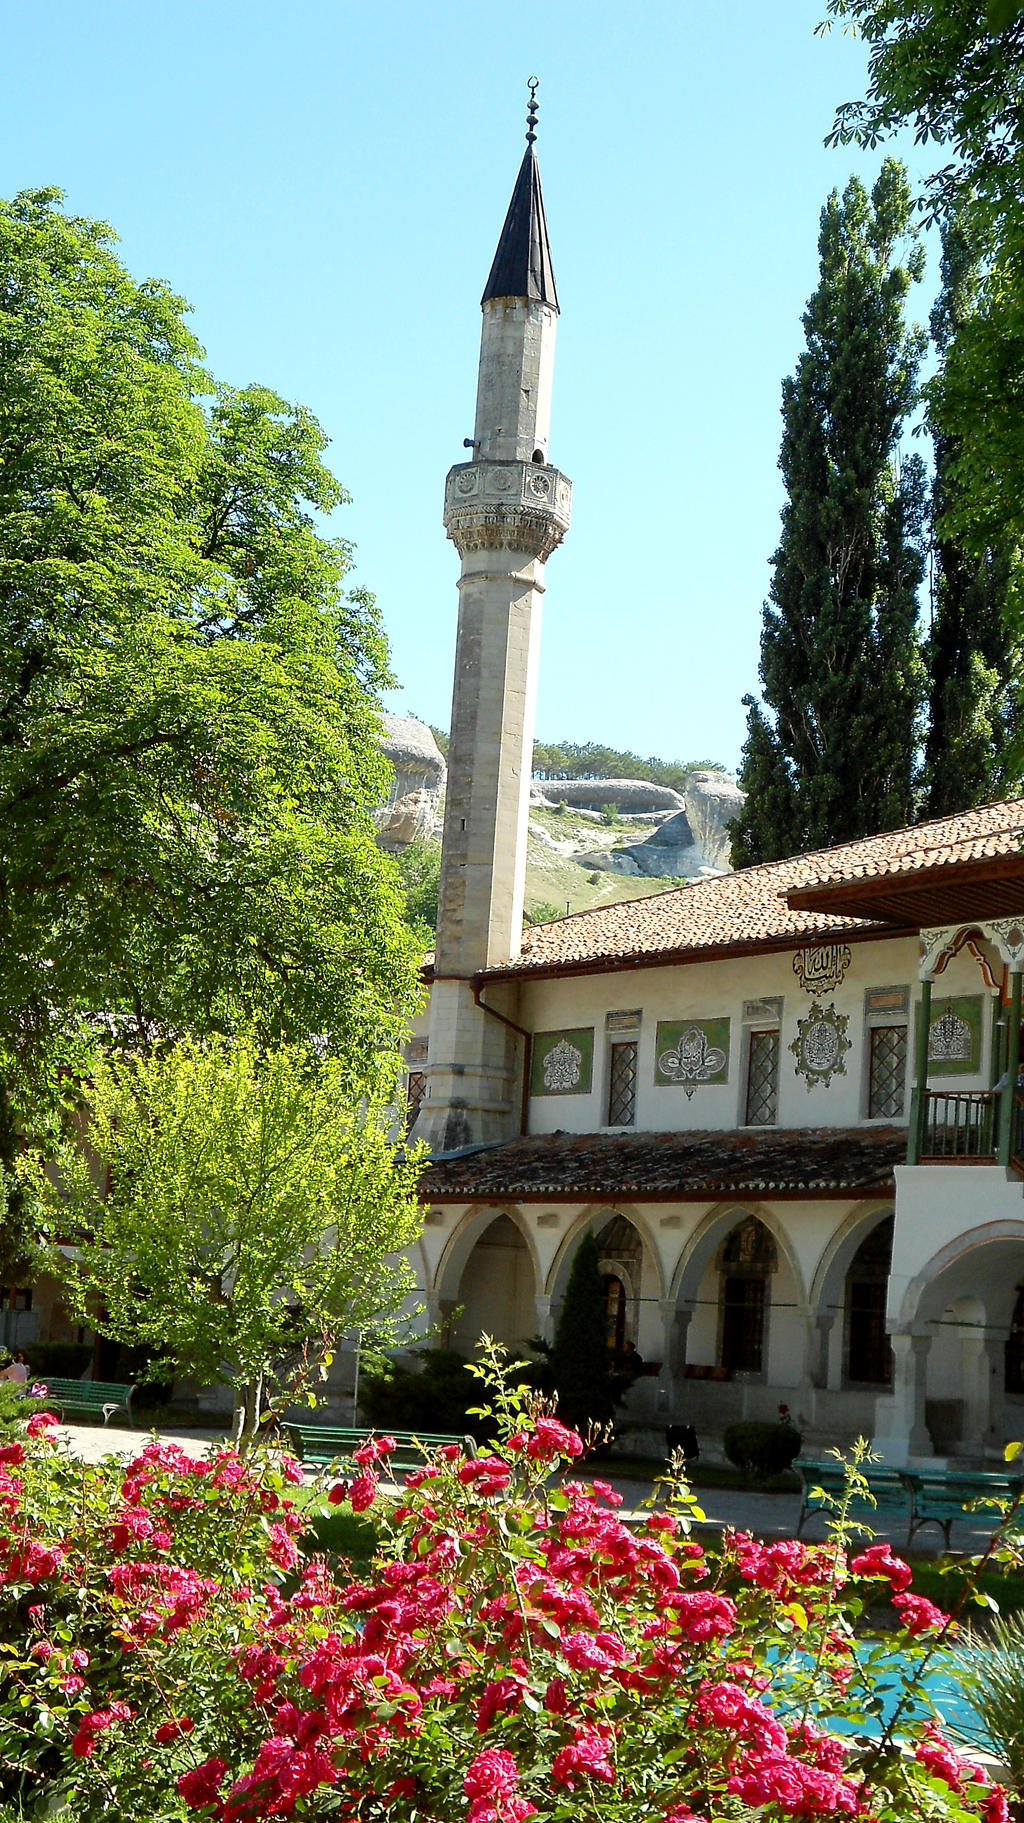 THE BIG KHAN MOSQUE in Bakhchisaray